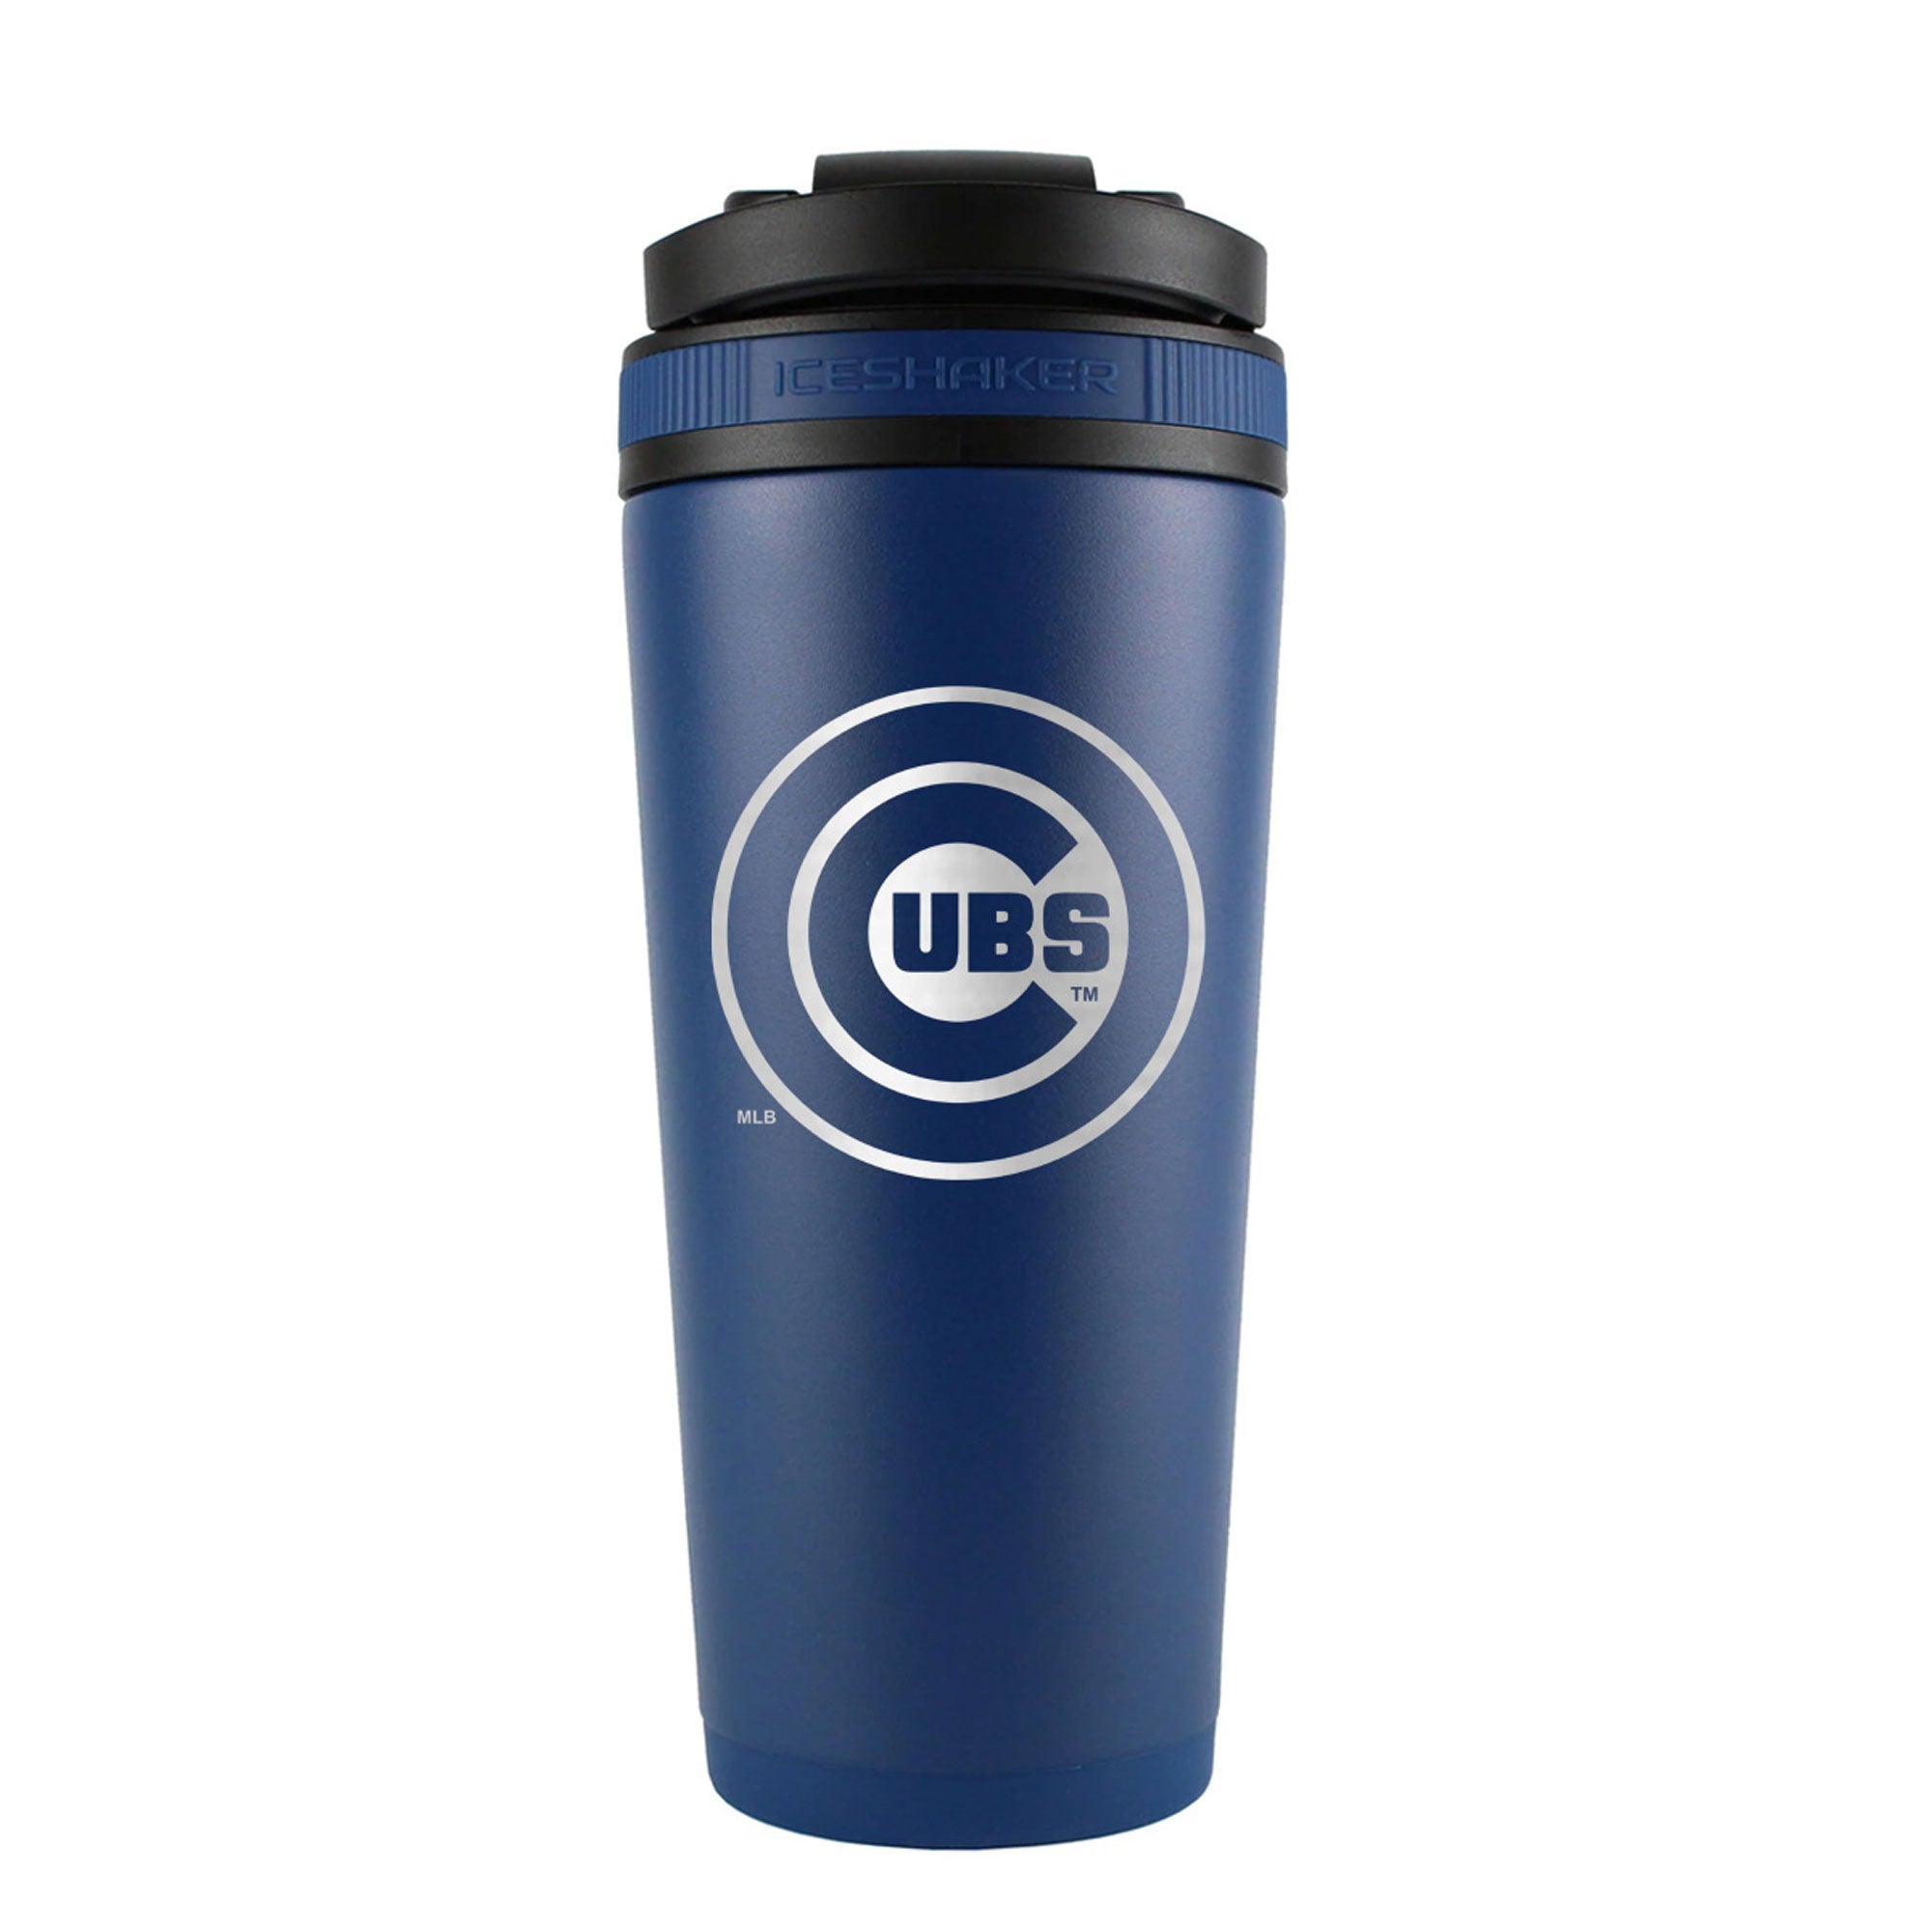 Officially Licensed Chicago Cubs 26oz Ice Shaker - Navy